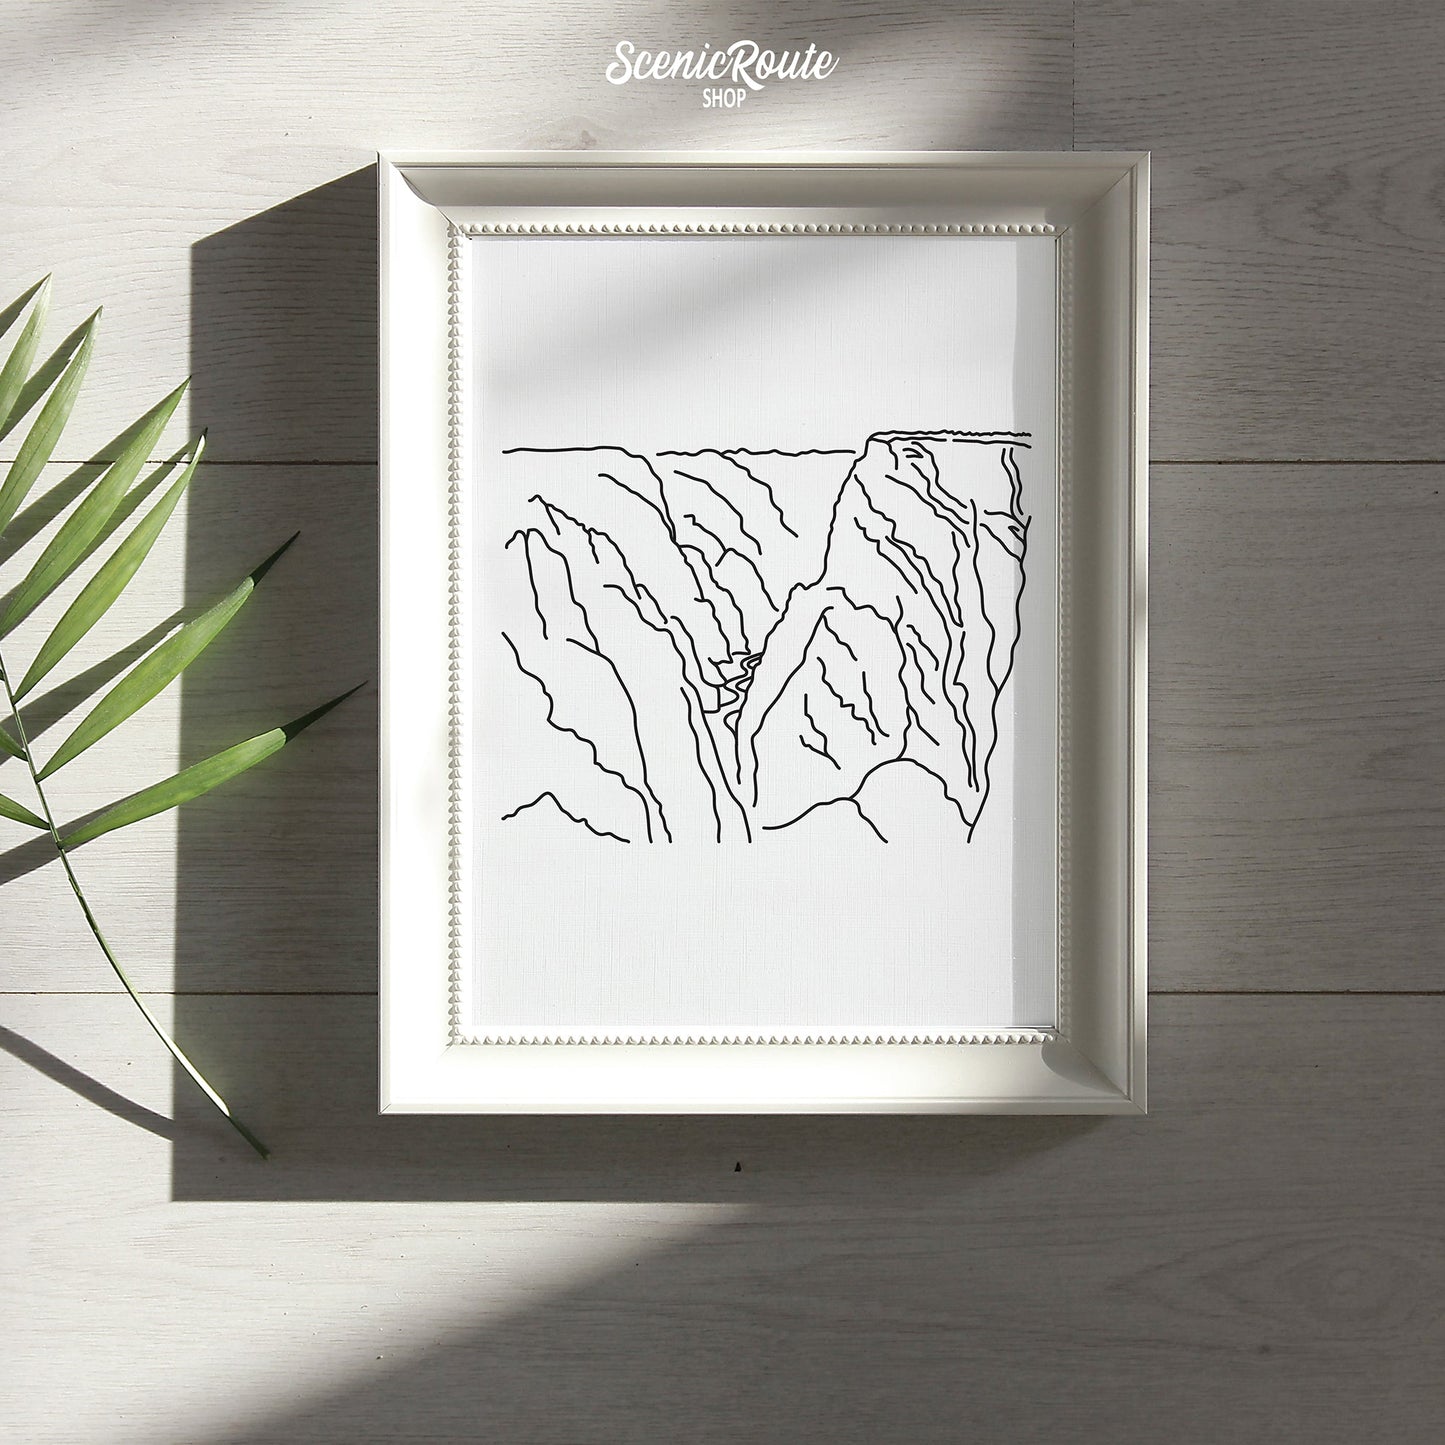 A framed line art drawing of Black Canyon of the Gunnison National Park with a palm frond